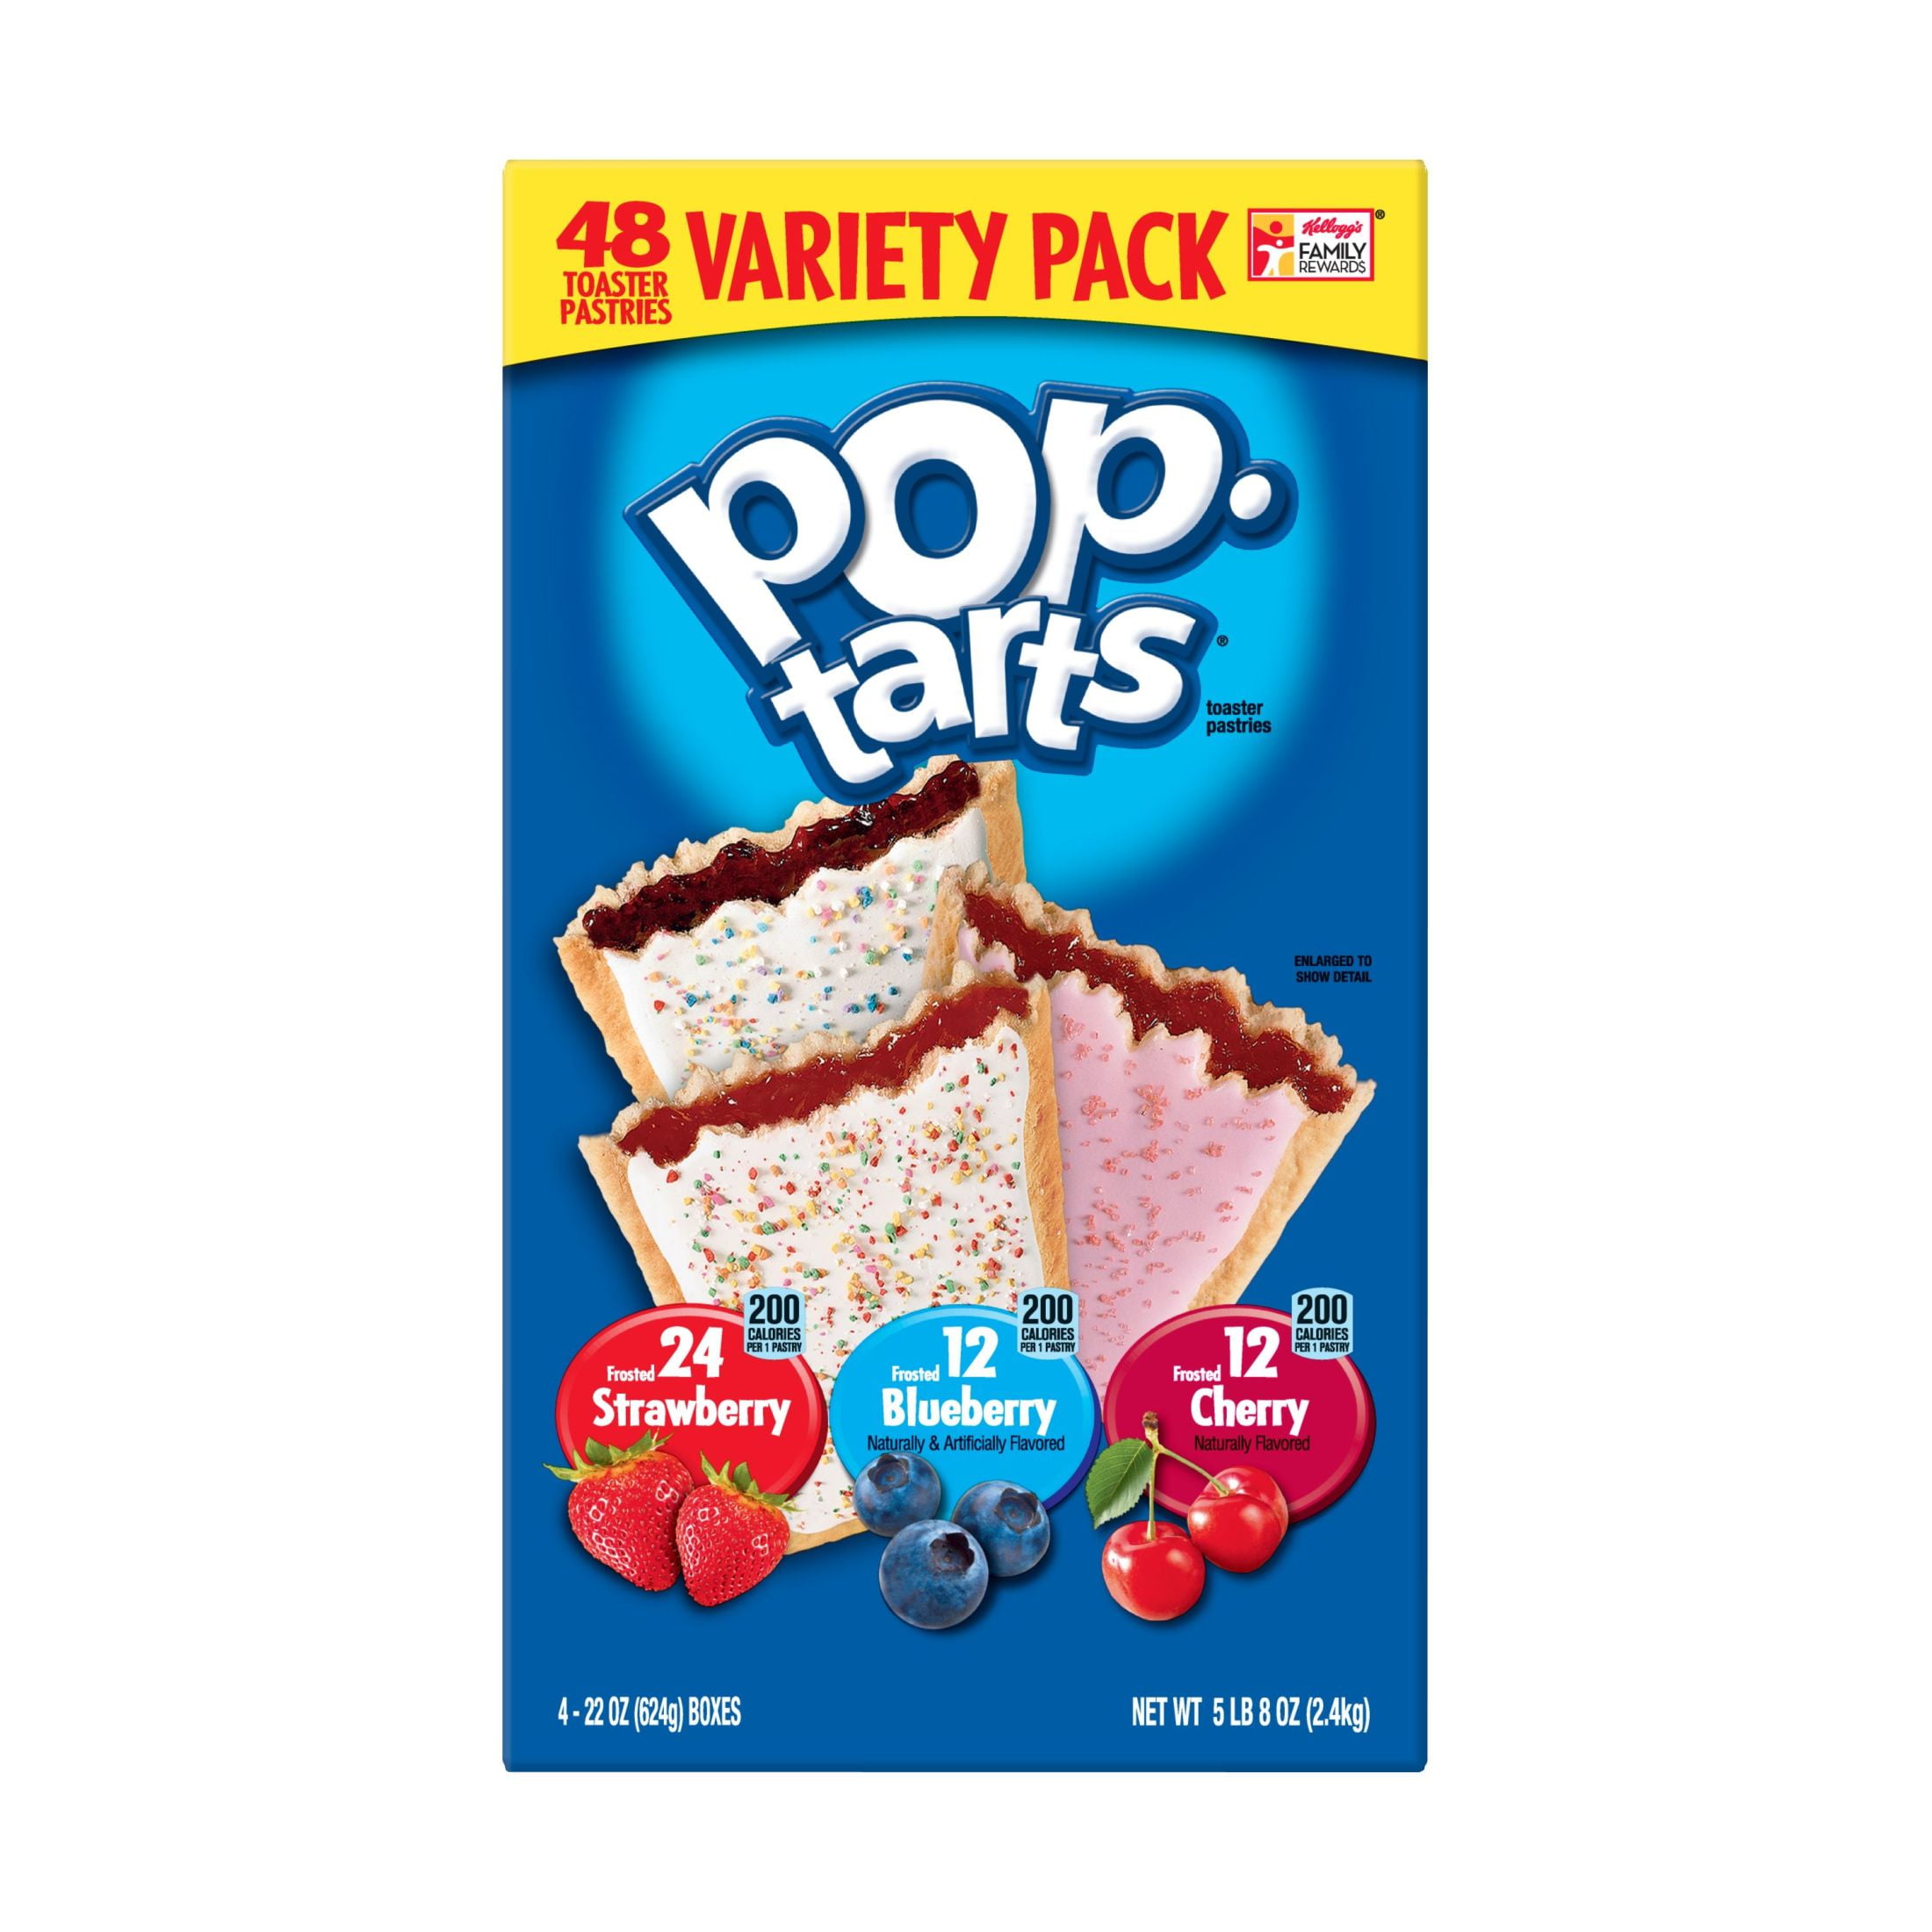 Pop-Tarts Variety Pack Breakfast Toaster Pastries, 88 oz, 48 Count 